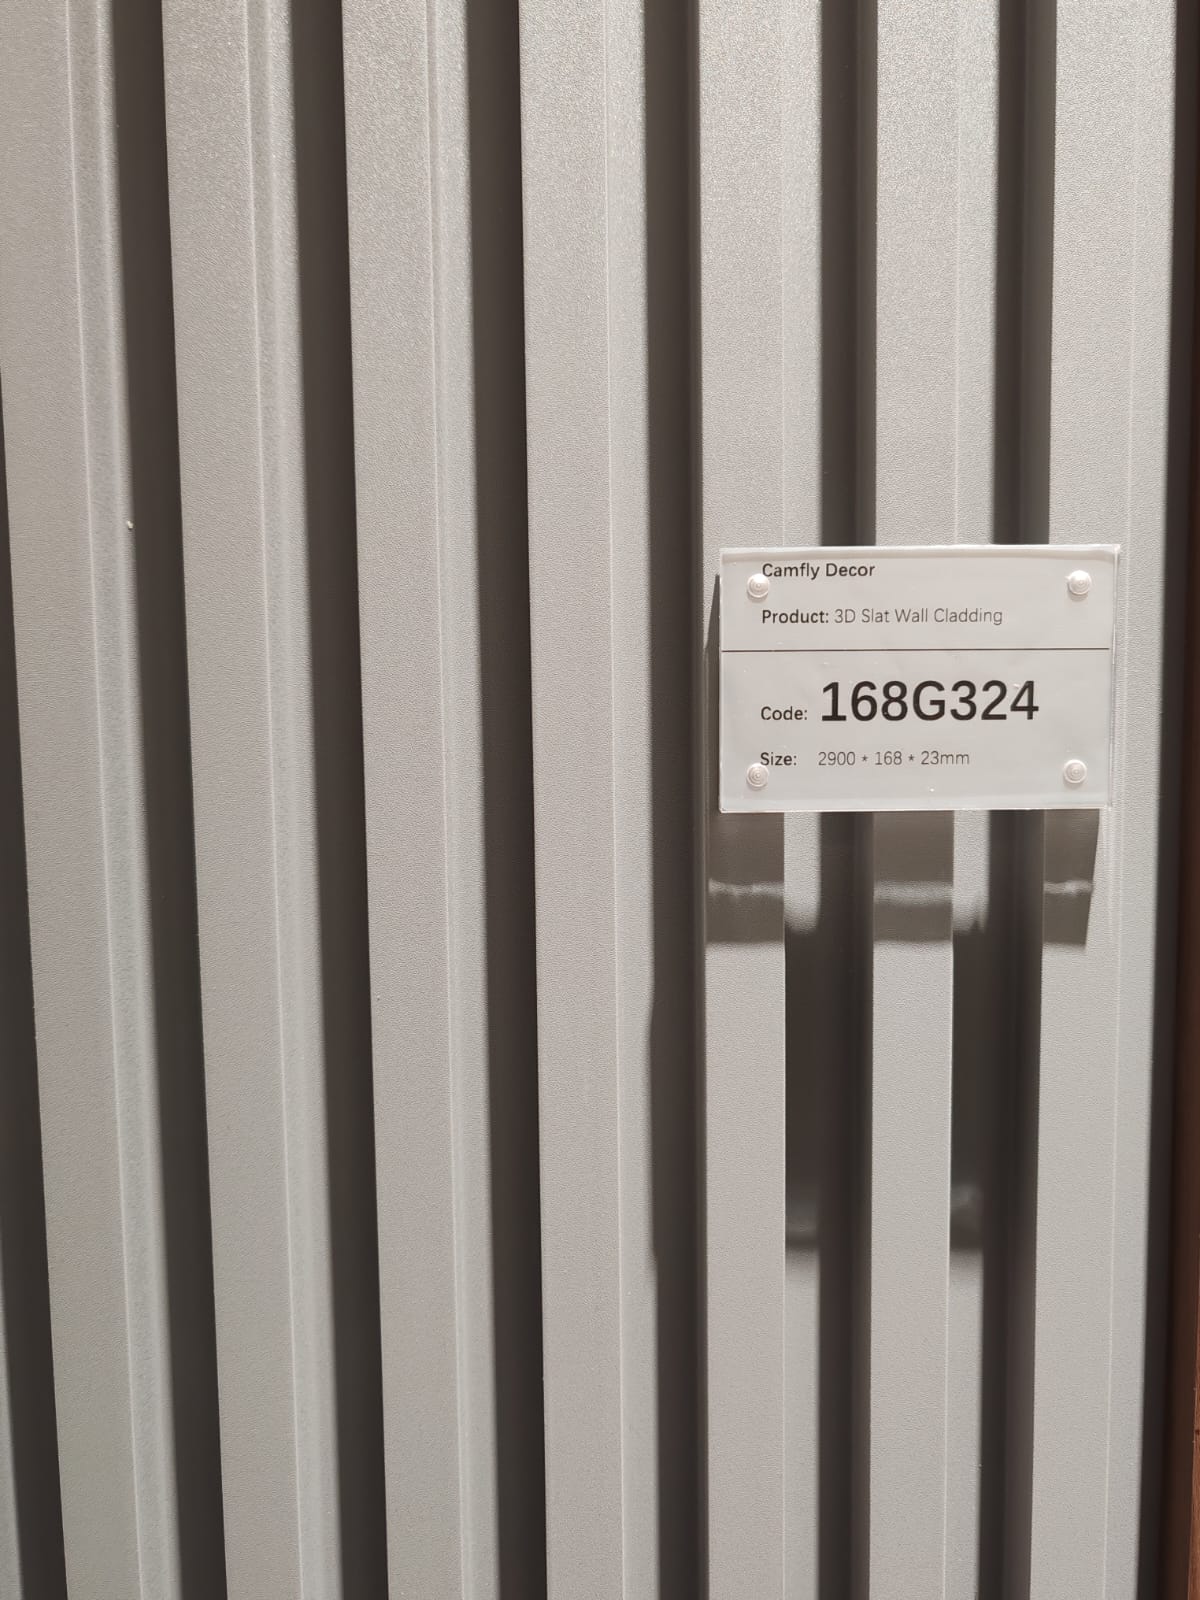 Camfly 168G324 Grey Fluted Slat Wall Cladding Length: 2900mm, Width: 170mm, Thickness: 23mm (Copy)